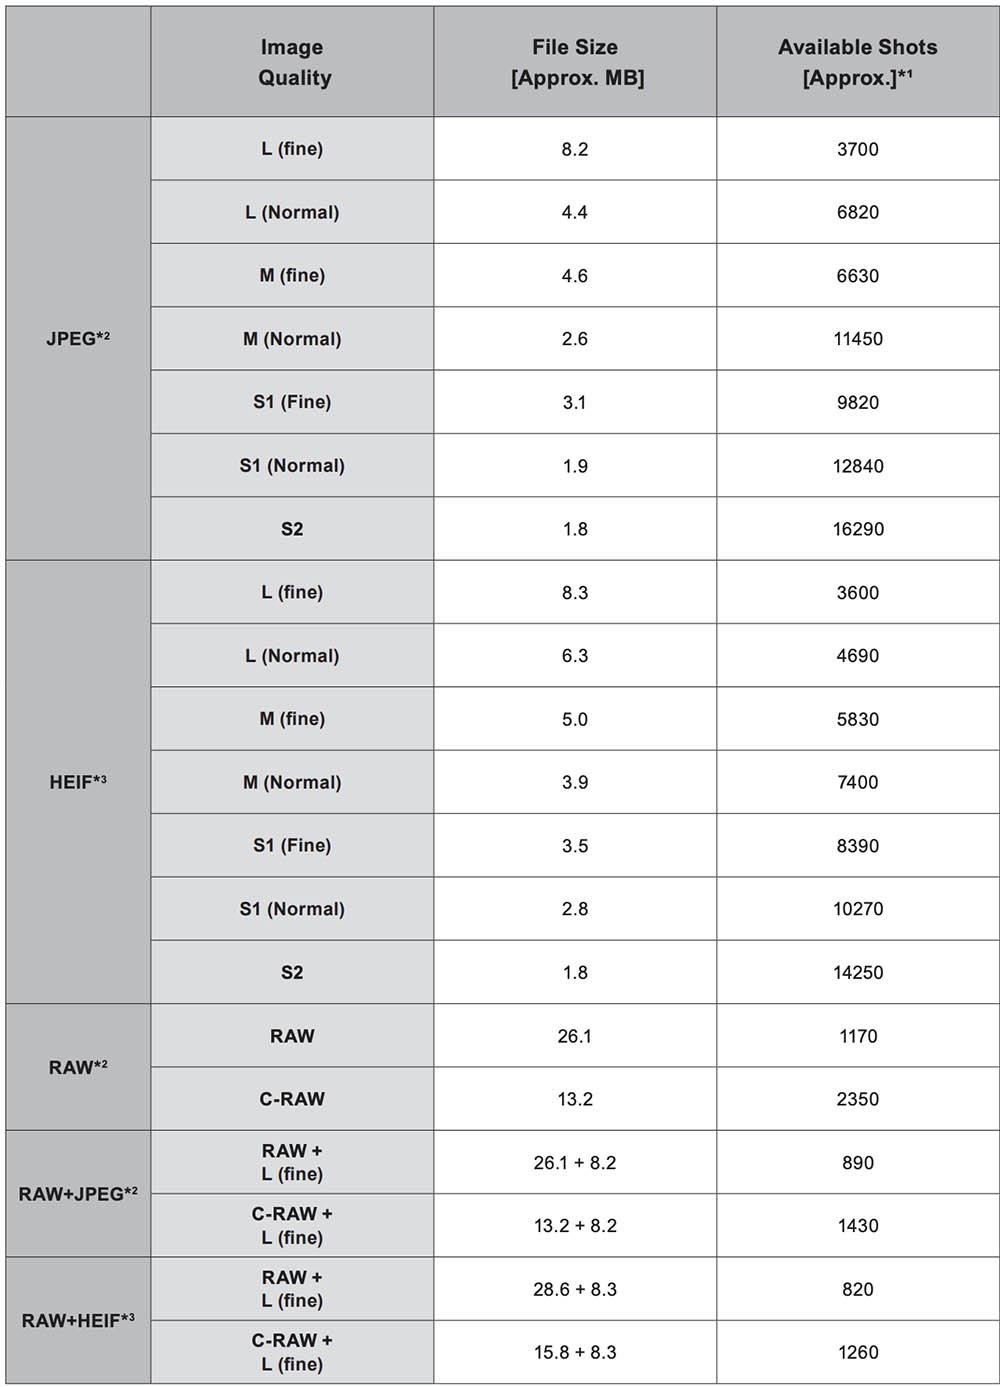 Canon R8 File Sizes and Images Per Card